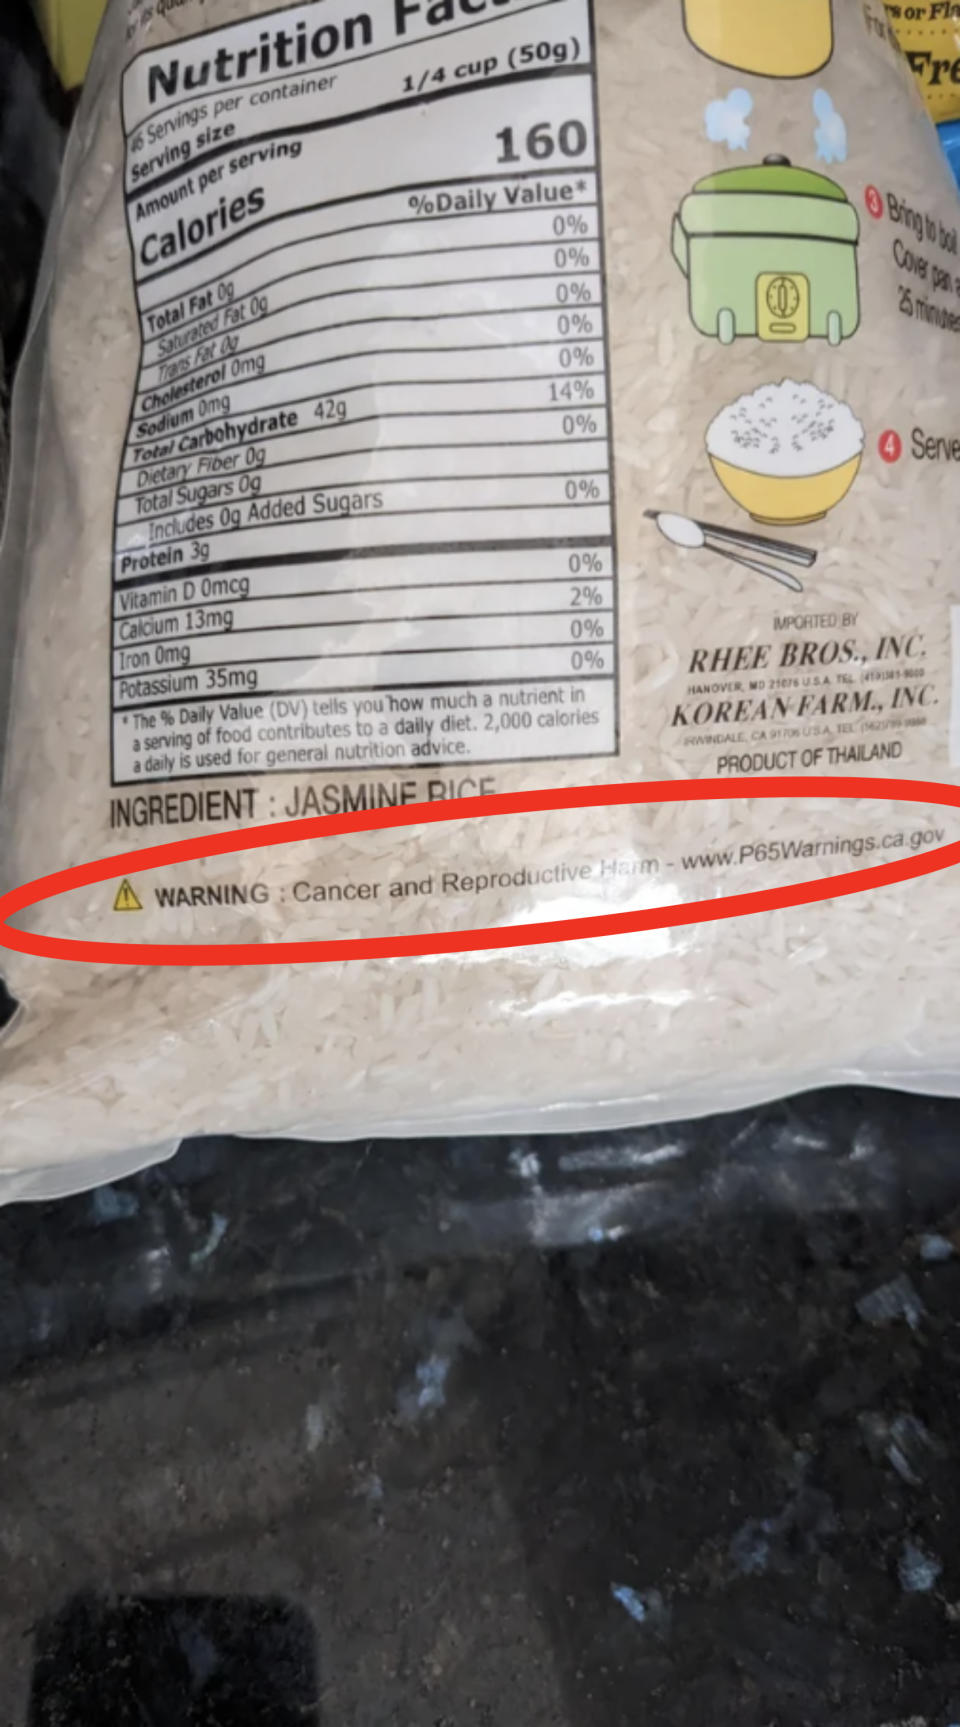 A label for jasmine rice with the warning "Cancer and Reproductive Harm - www.P65warnings.ca.gov" circled